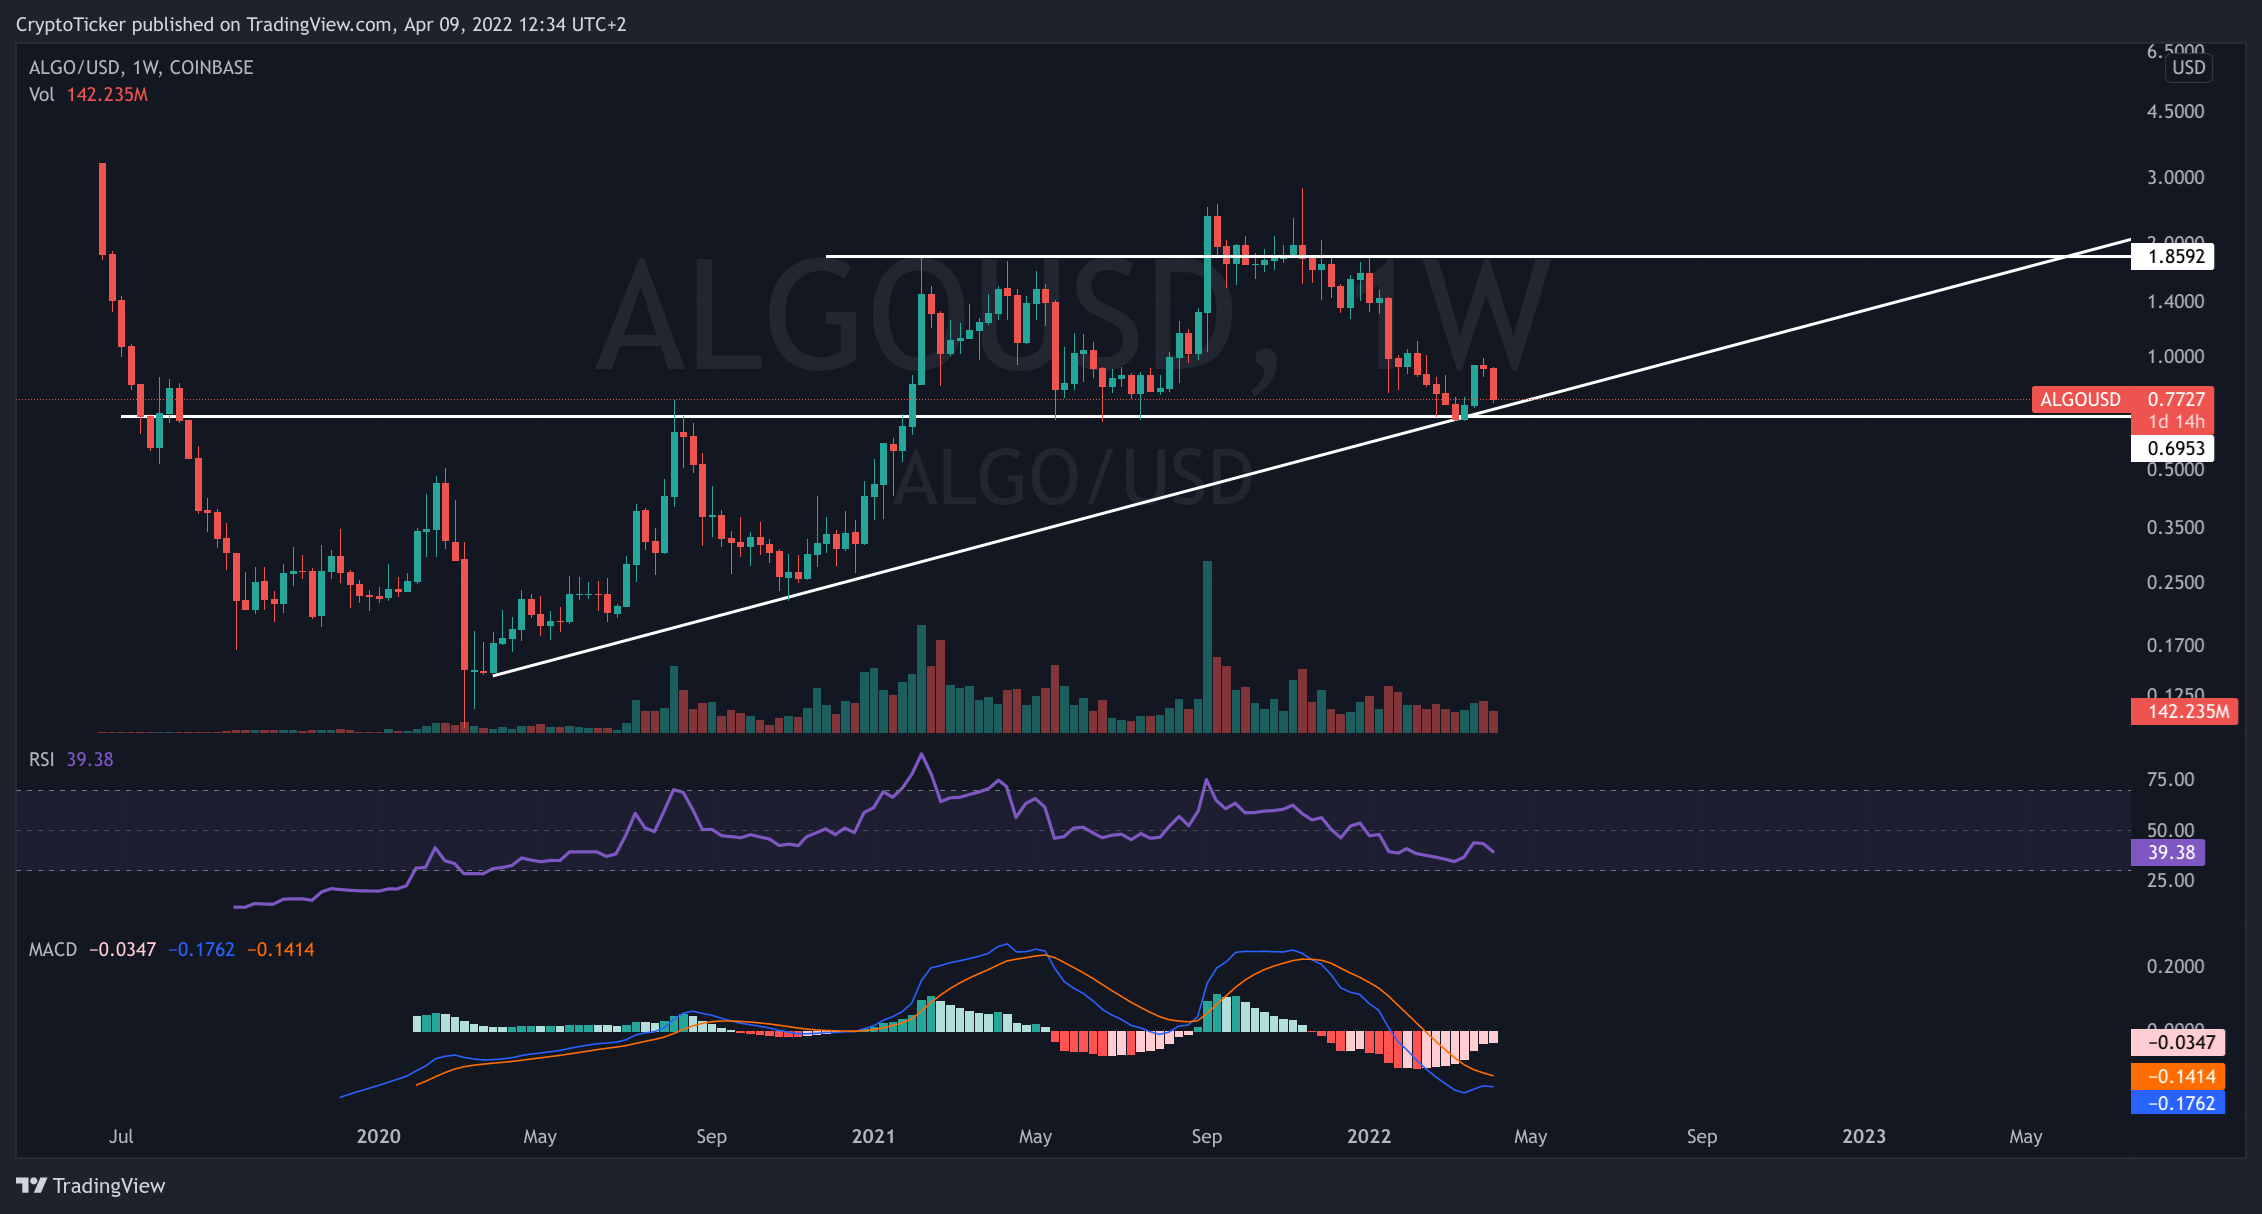 ALGO/USD 1-week chart showing the support area of ALGO